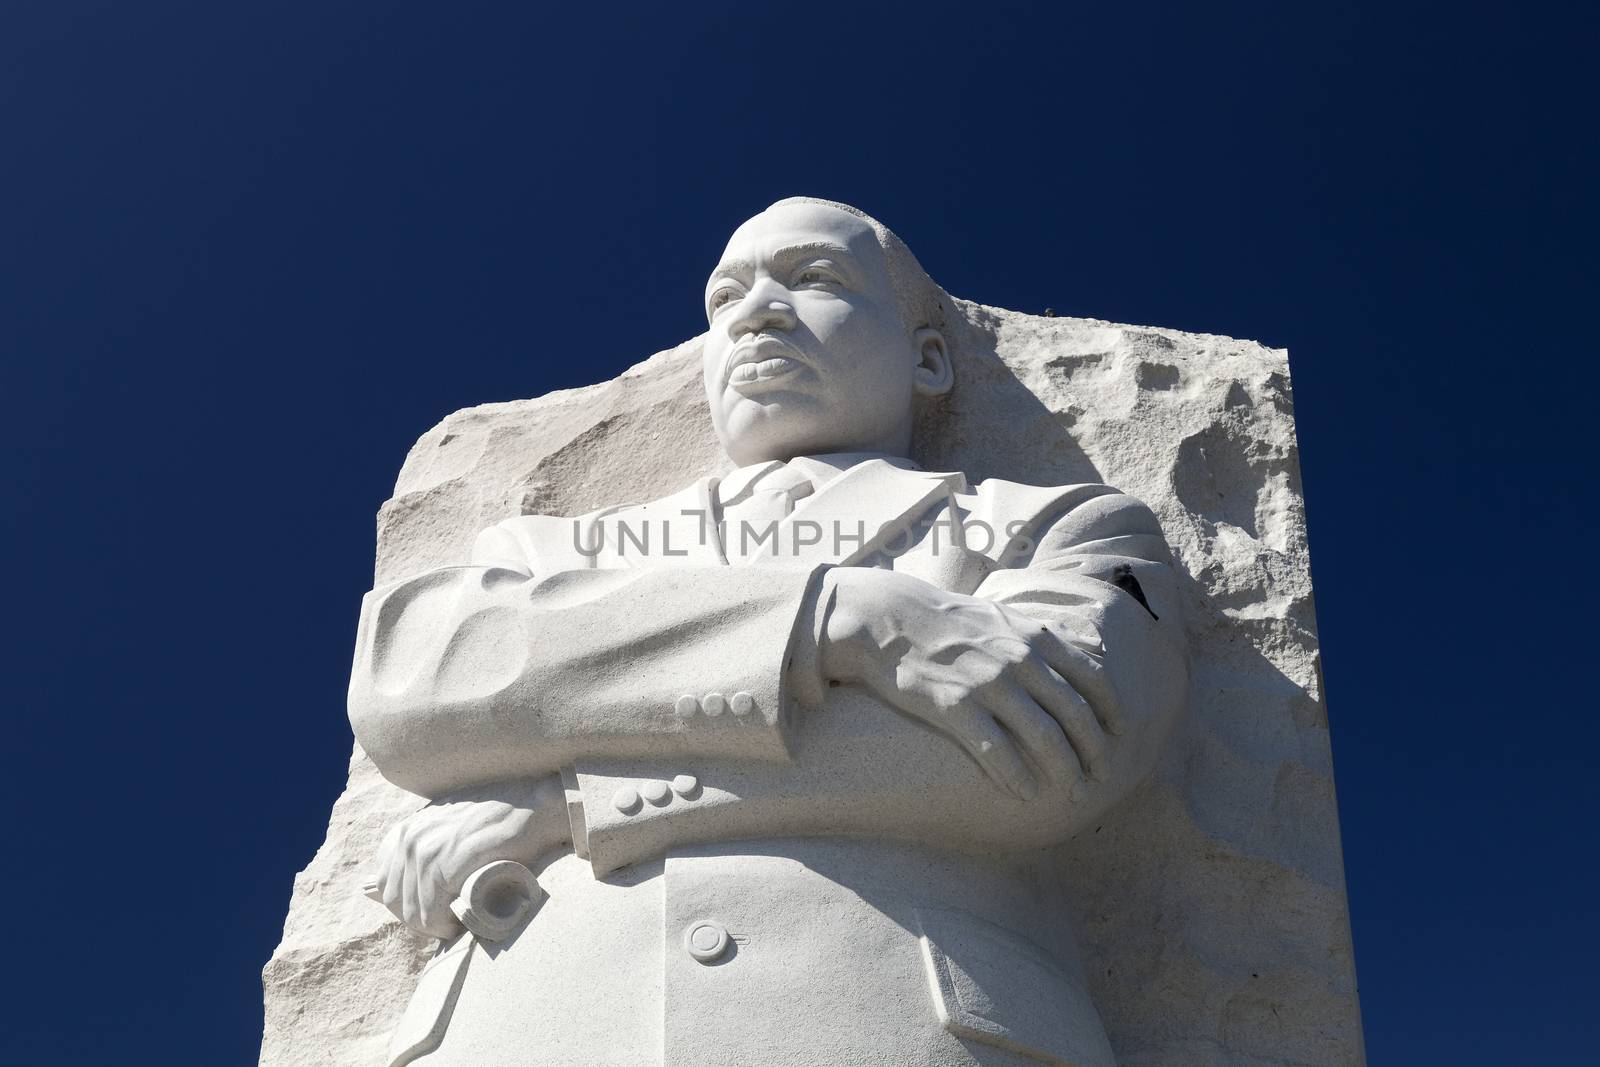 Washington DC, USA - October 17, 2014: The Martin Luther King Jr. Memorial located on the National Mall on the Tidal Basin in Washington DC is America's 395th National Park.